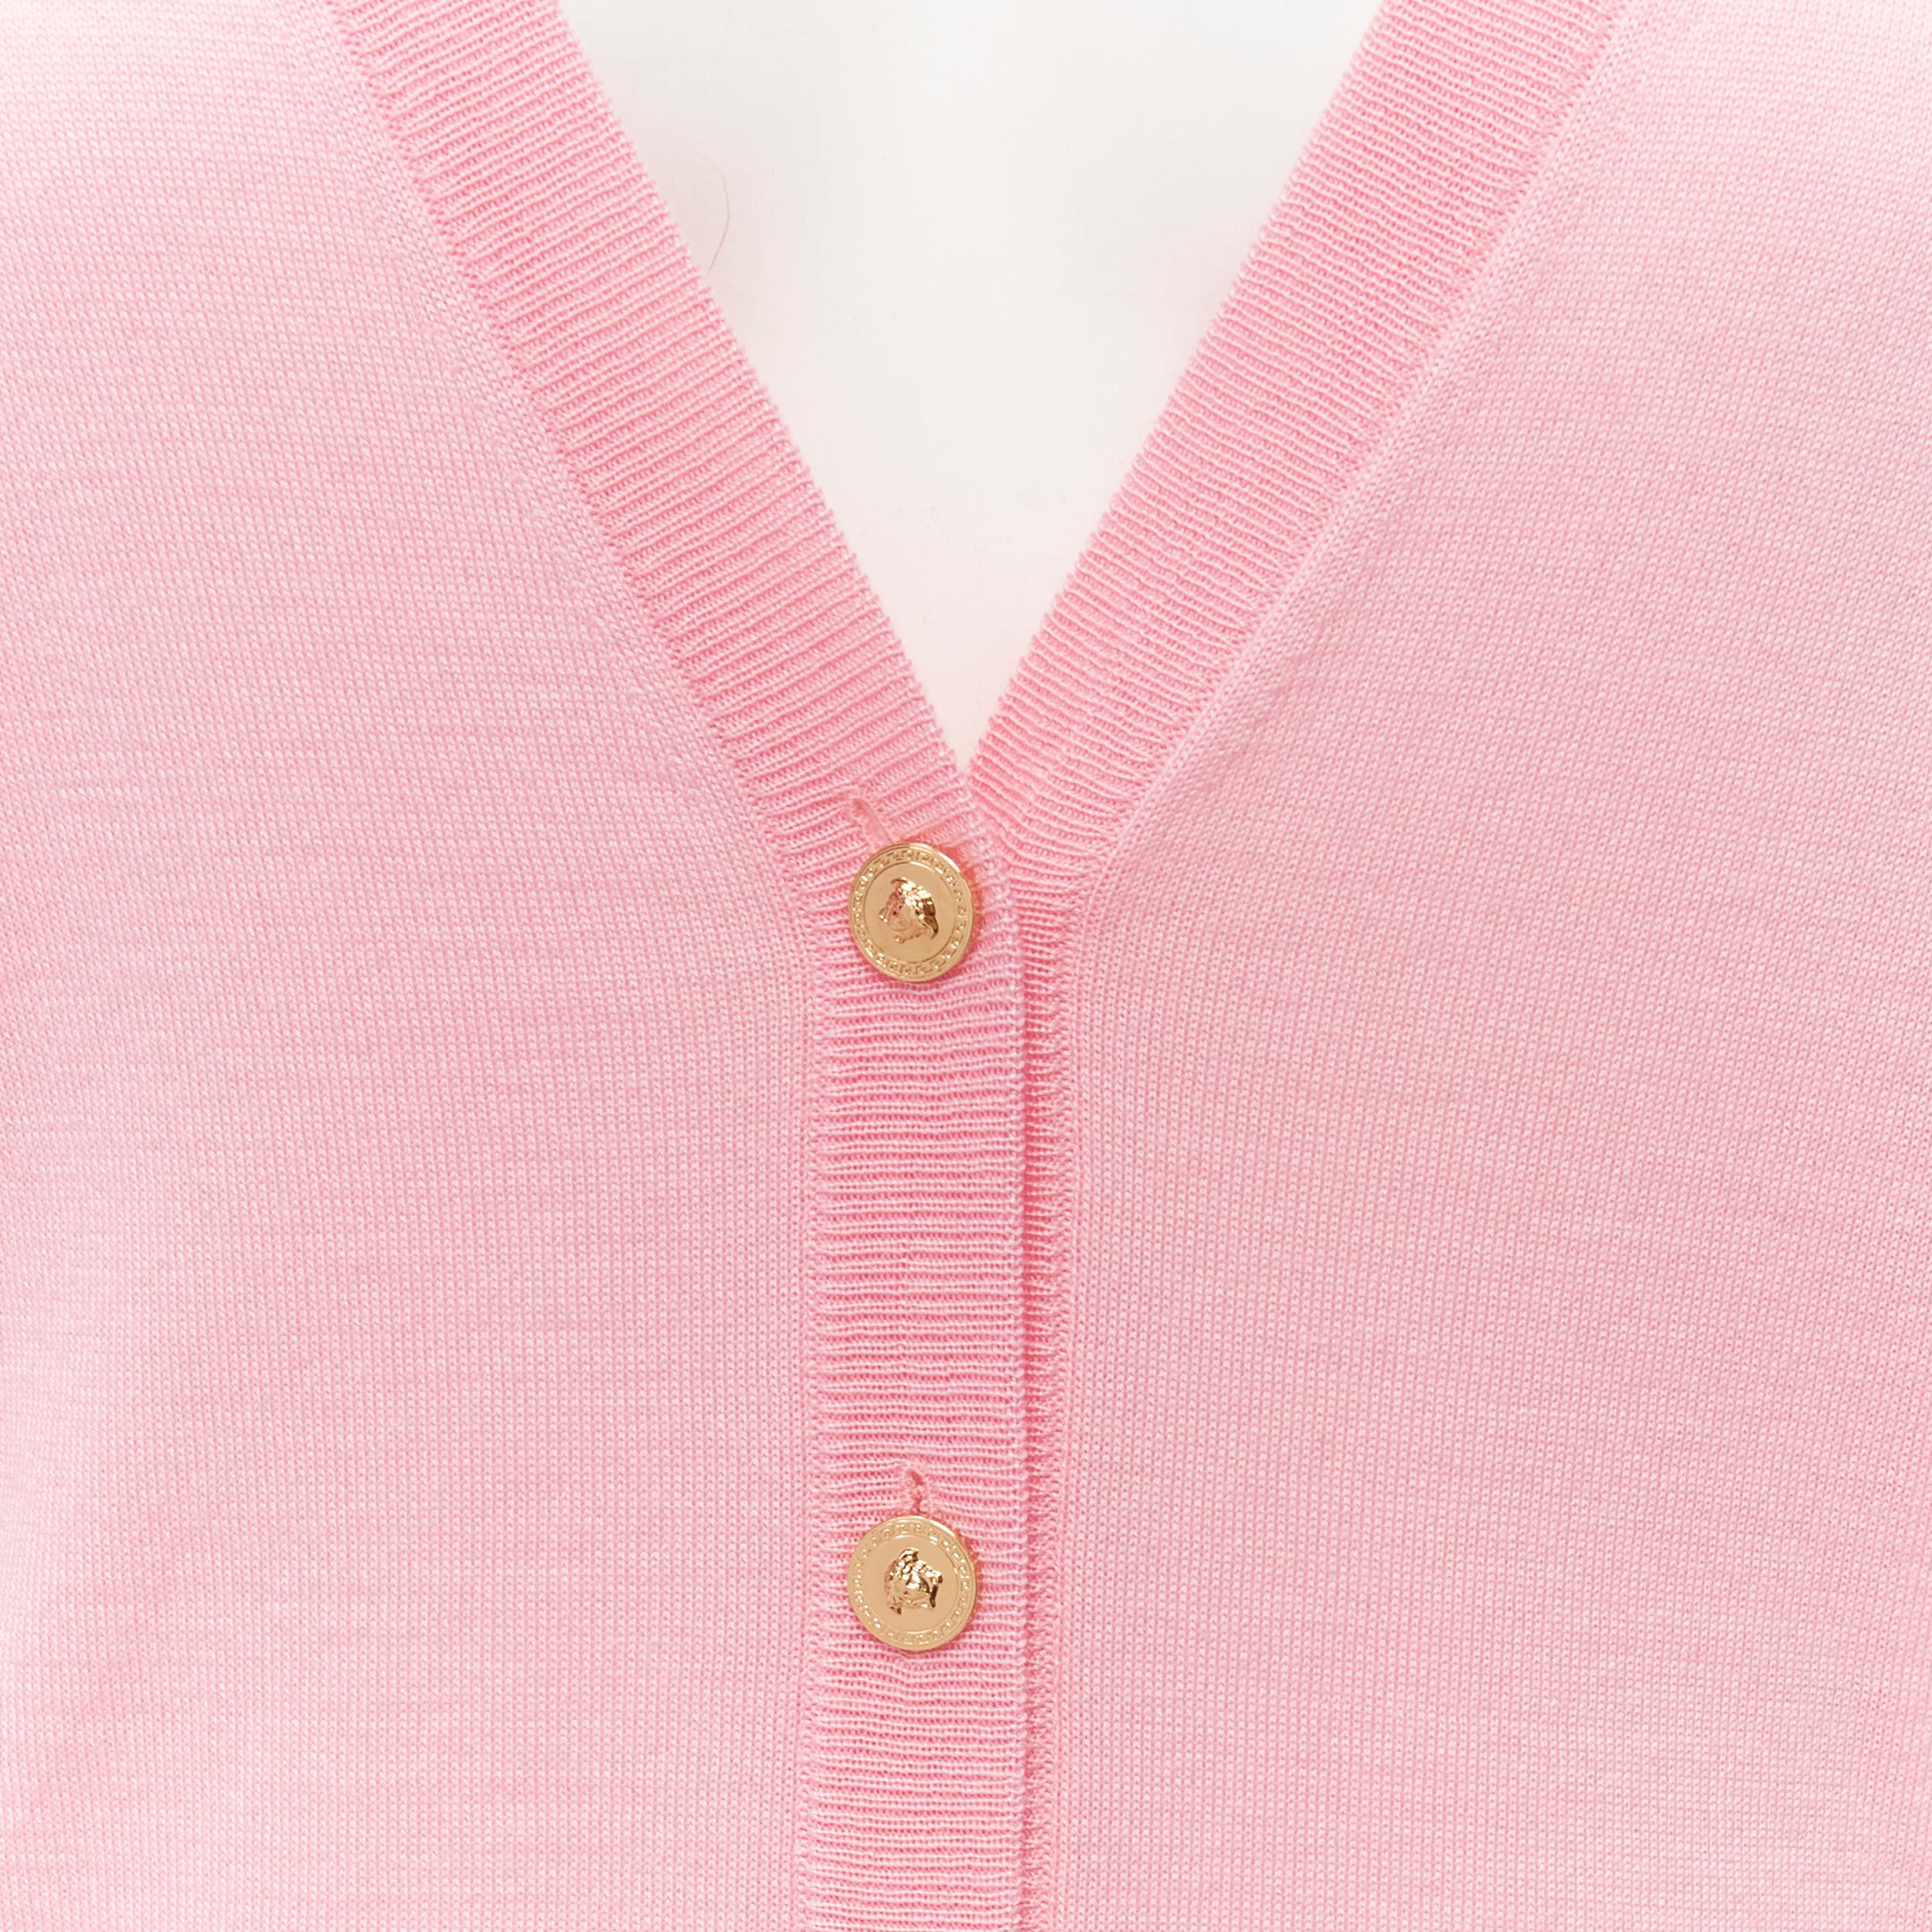 new VERSACE 2020 Medusa buttons pink wool cashmere silk cardigan IT44 L
Reference: TGAS/C01772
Brand: Versace
Designer: Donatella Versace
Model: A89094 A237534 1P590
Collection: 2020
Material: Virgin Wool, Cashmere
Color: Pink
Pattern: